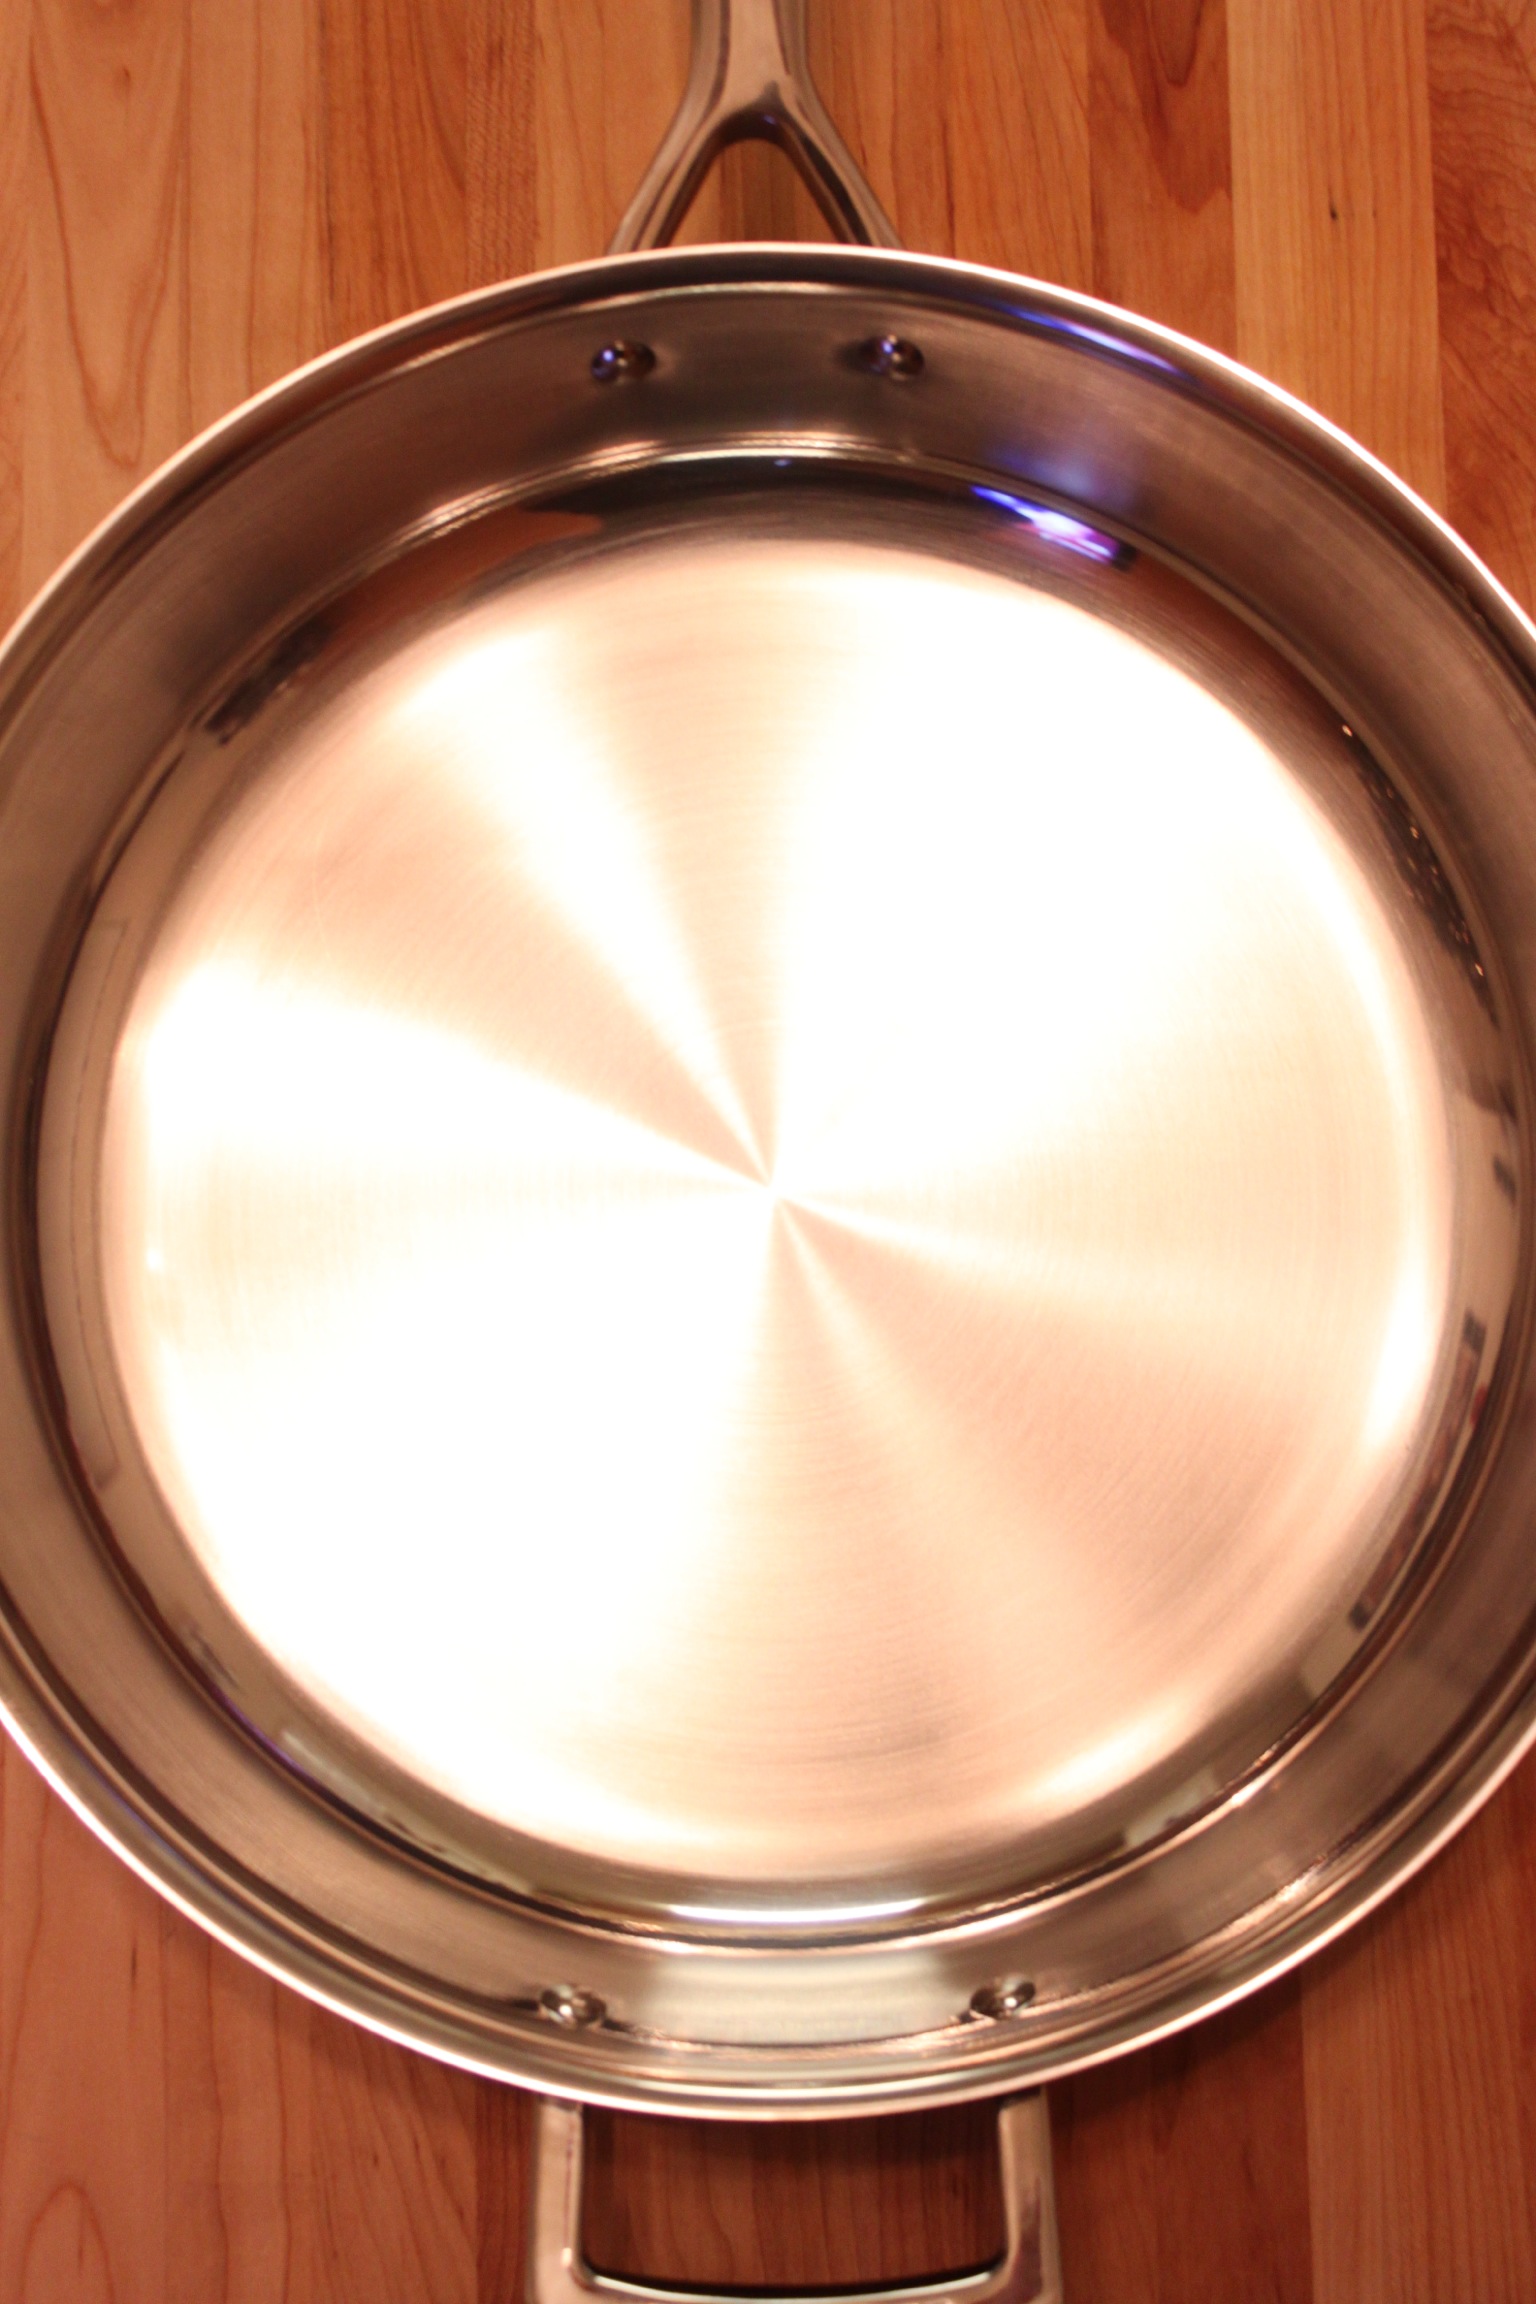 How To Season A Stainless Steel Pan Properly : 4 Simple Steps